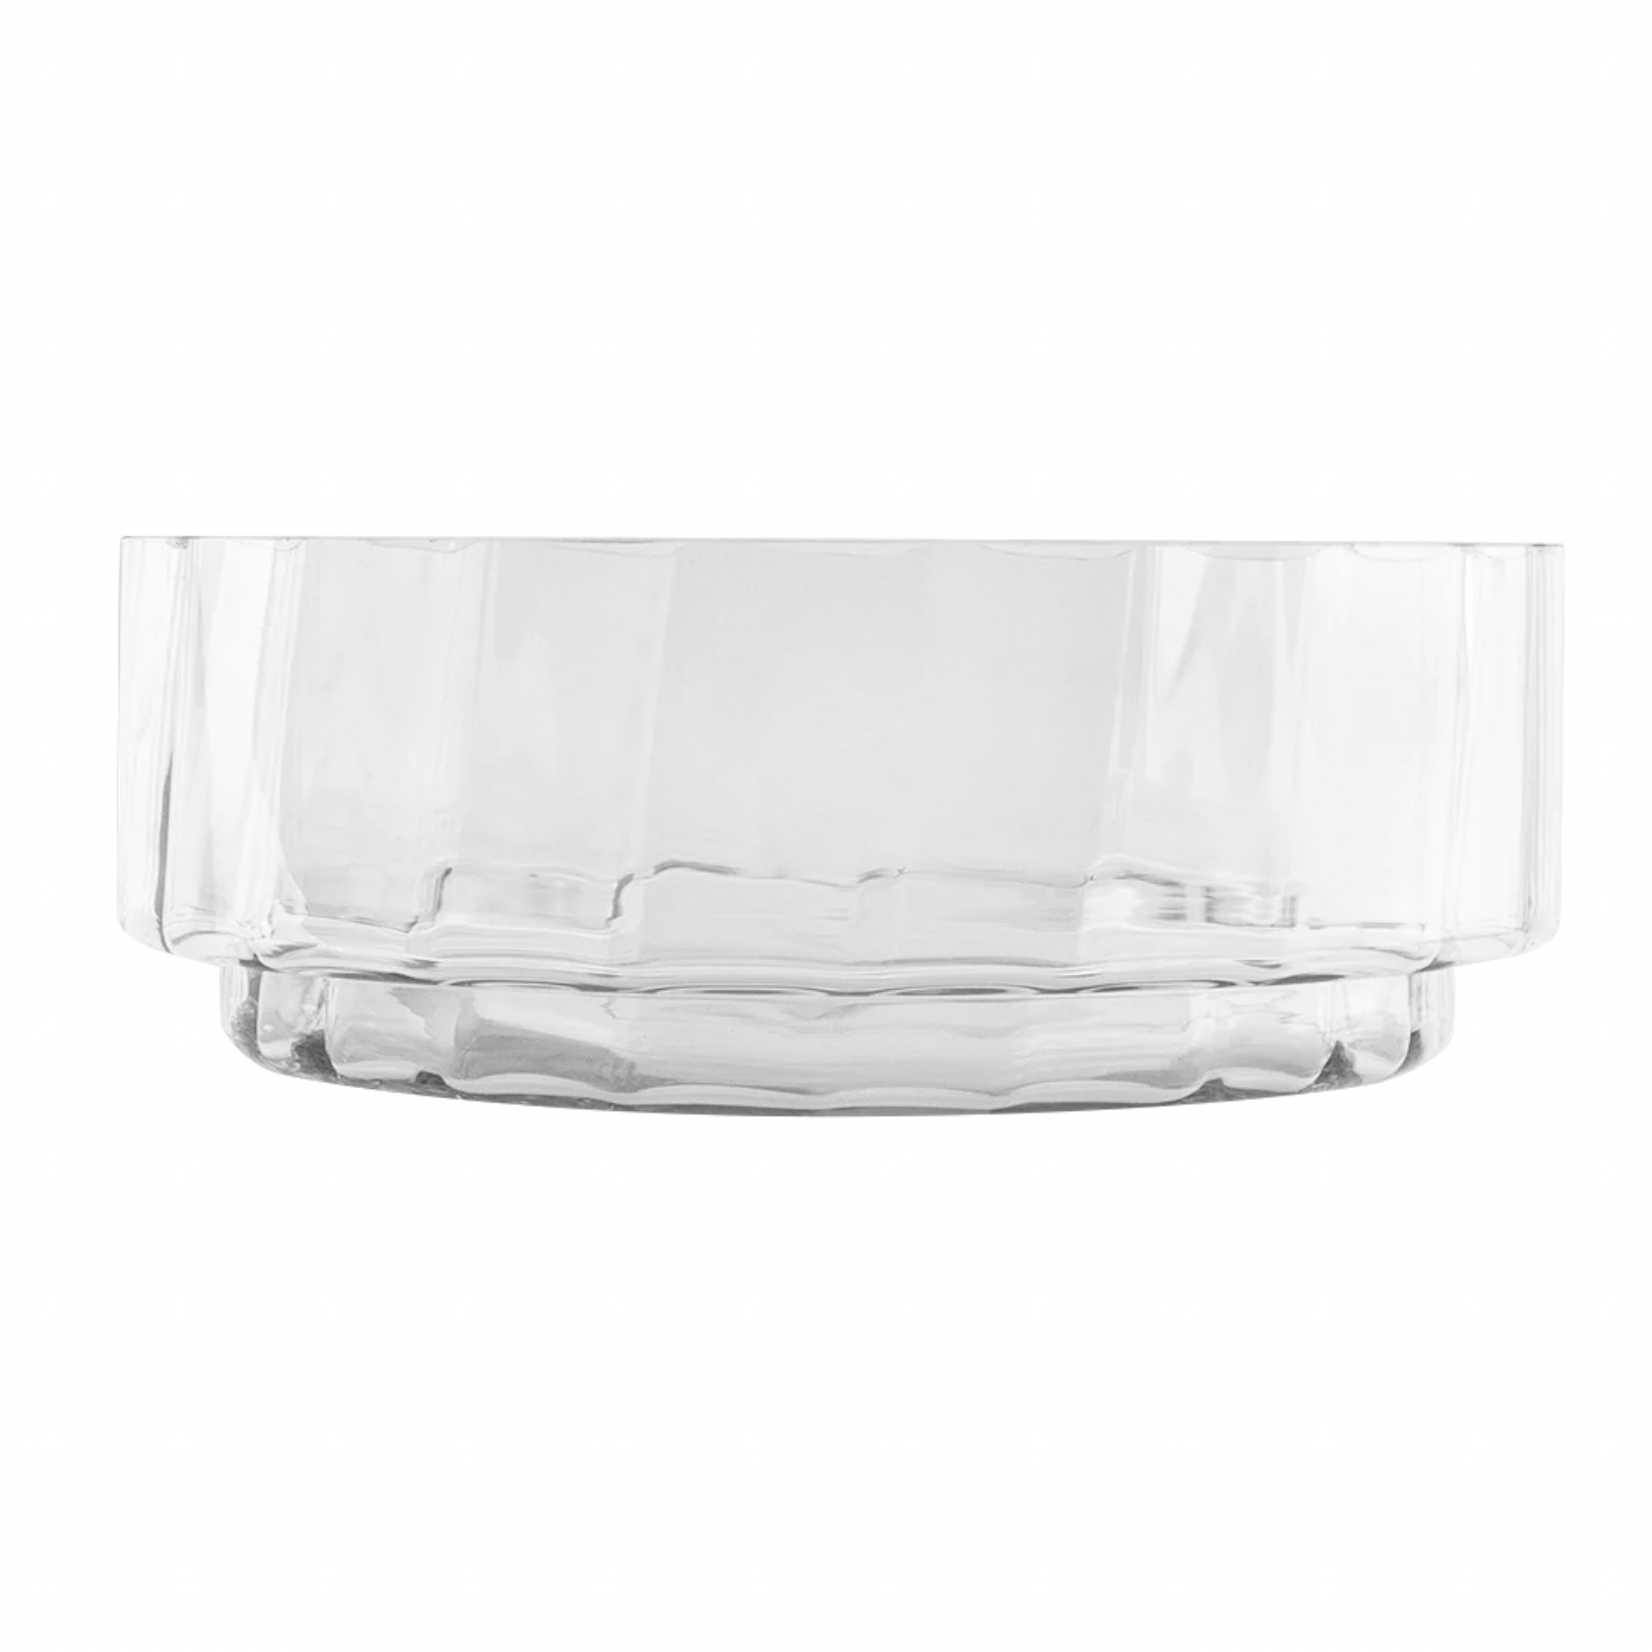 40% off was $52.49 now $31.49. 5”h x 13.75” LOW GLASS CYLINDER BOWL